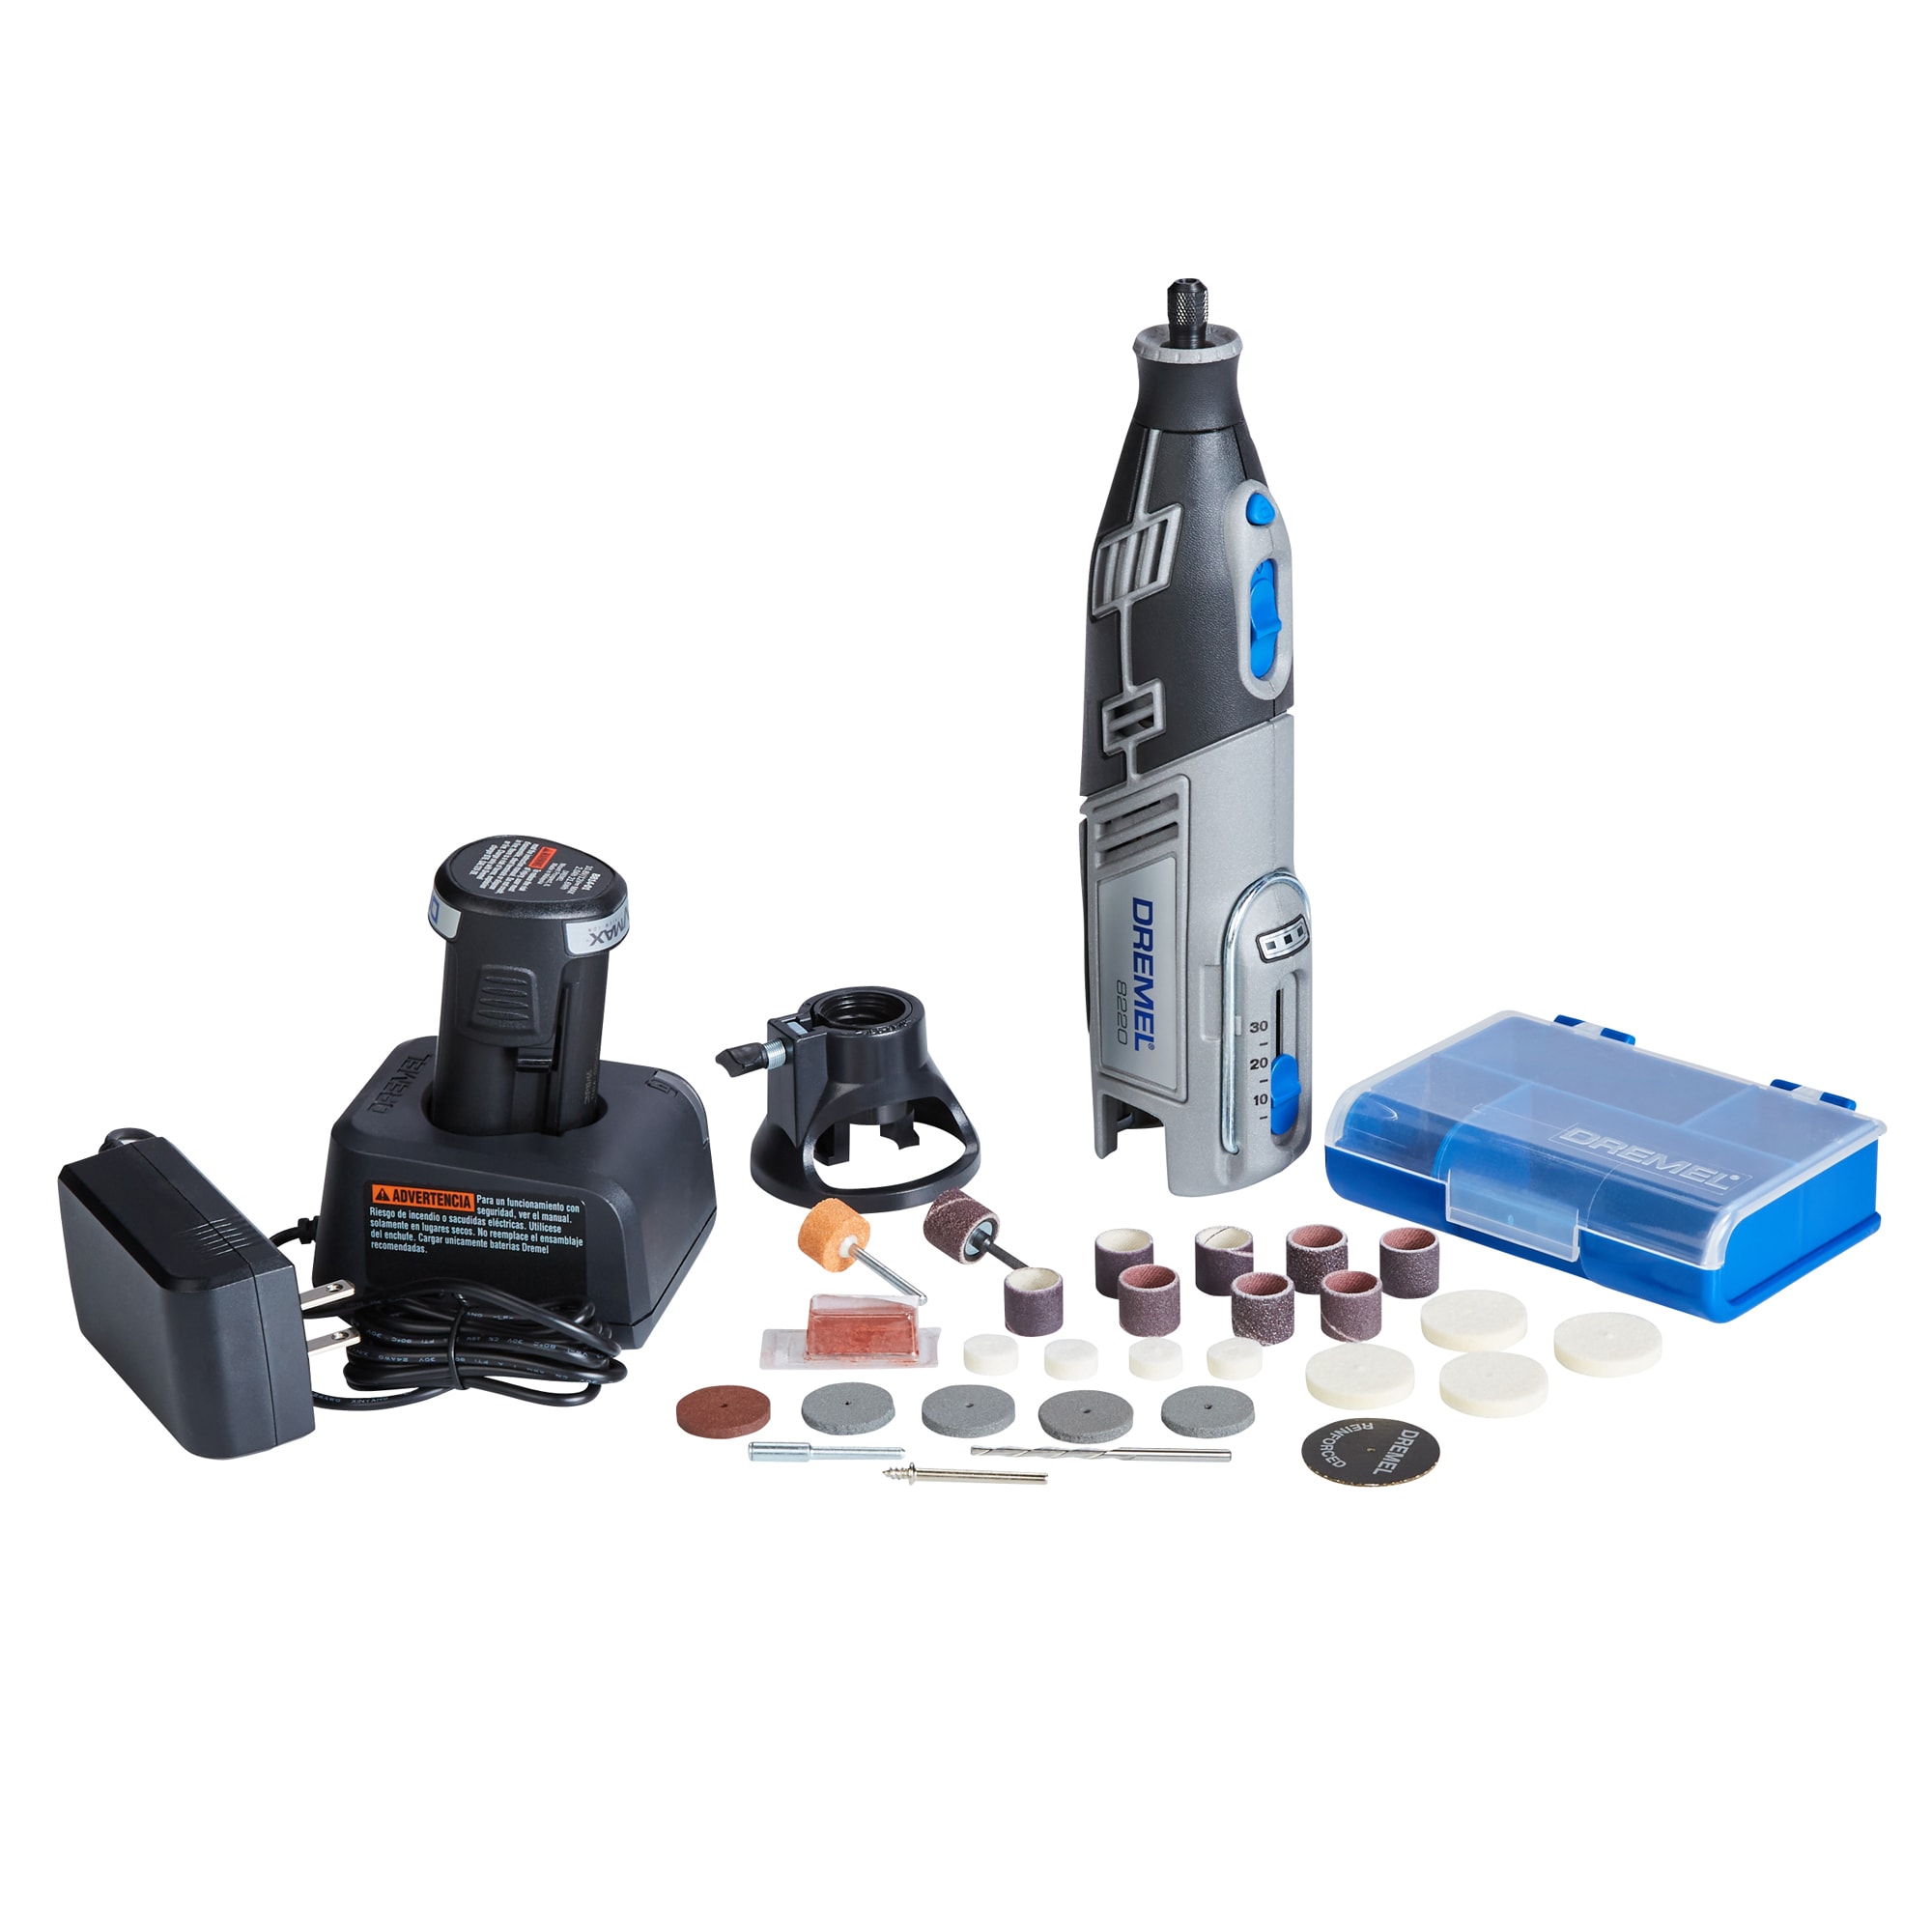 Dremel 8220 28-Piece Variable Speed Cordless 12-Volt Multipurpose Rotary Tool with Hard Case Lowes.com - $80 - YMMV